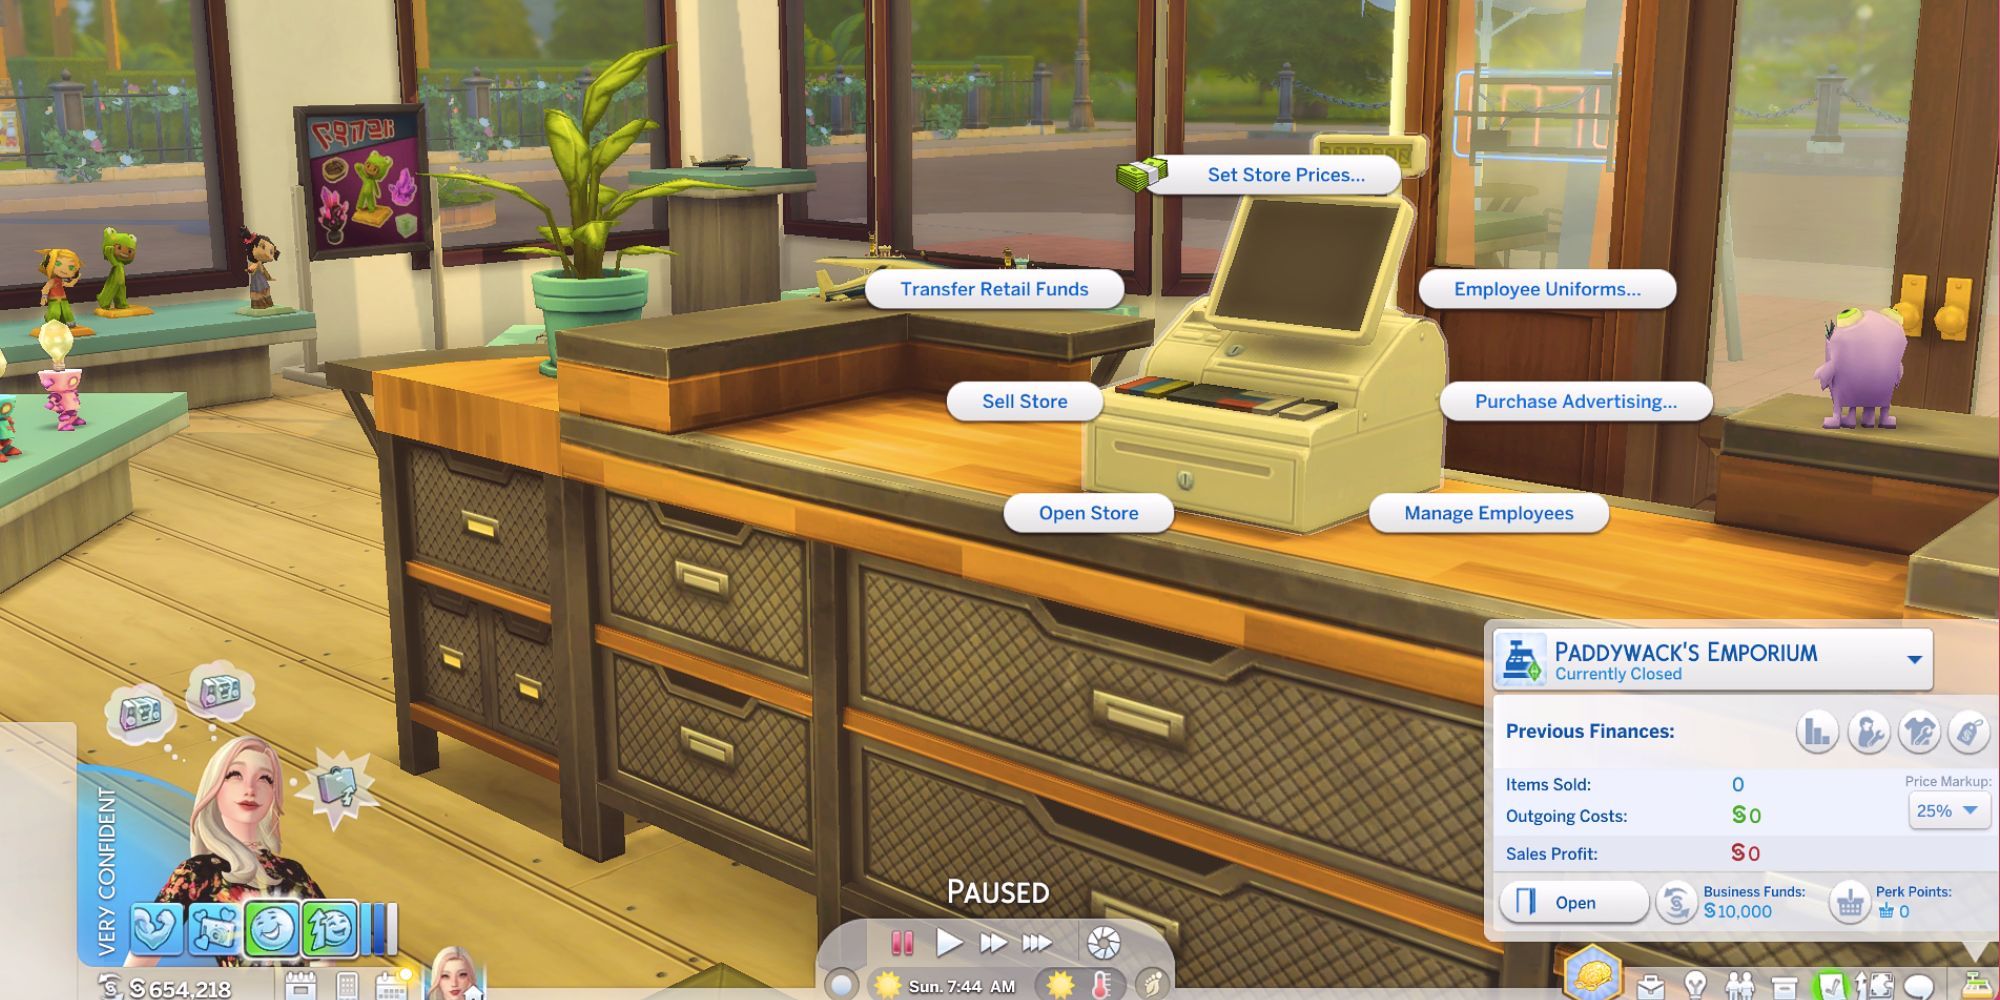 The Sims 4 Retail Management